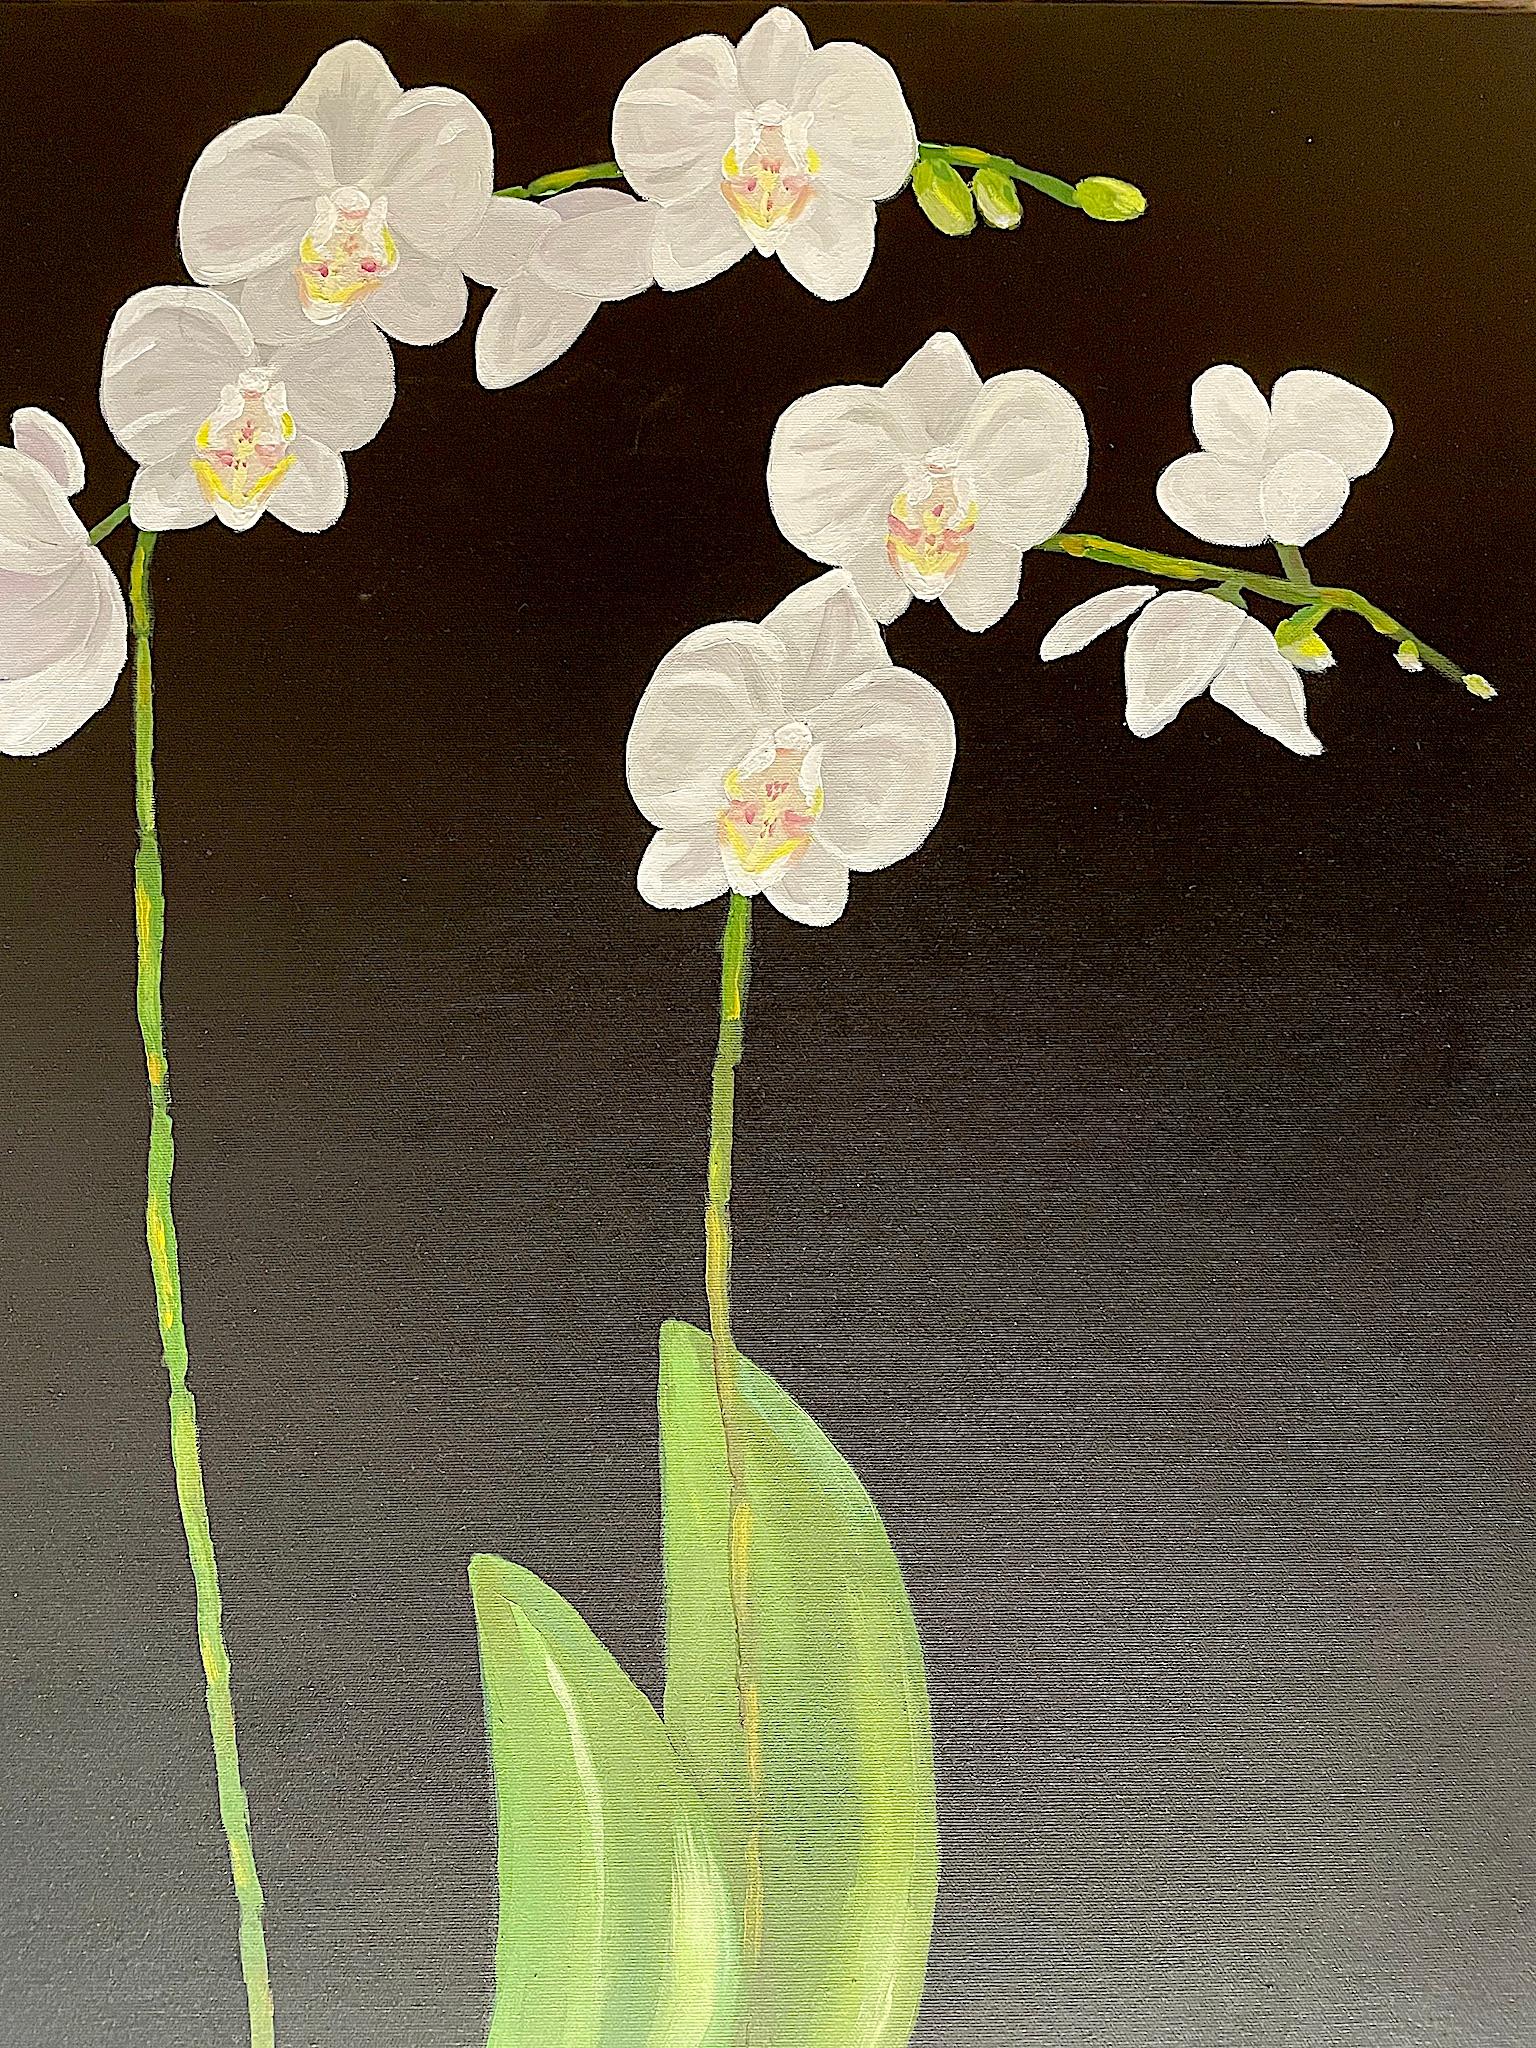 White Petals Standing on Tall Stems over Green Leaves. Title - Orchids - American Realist Painting by Ken Miller